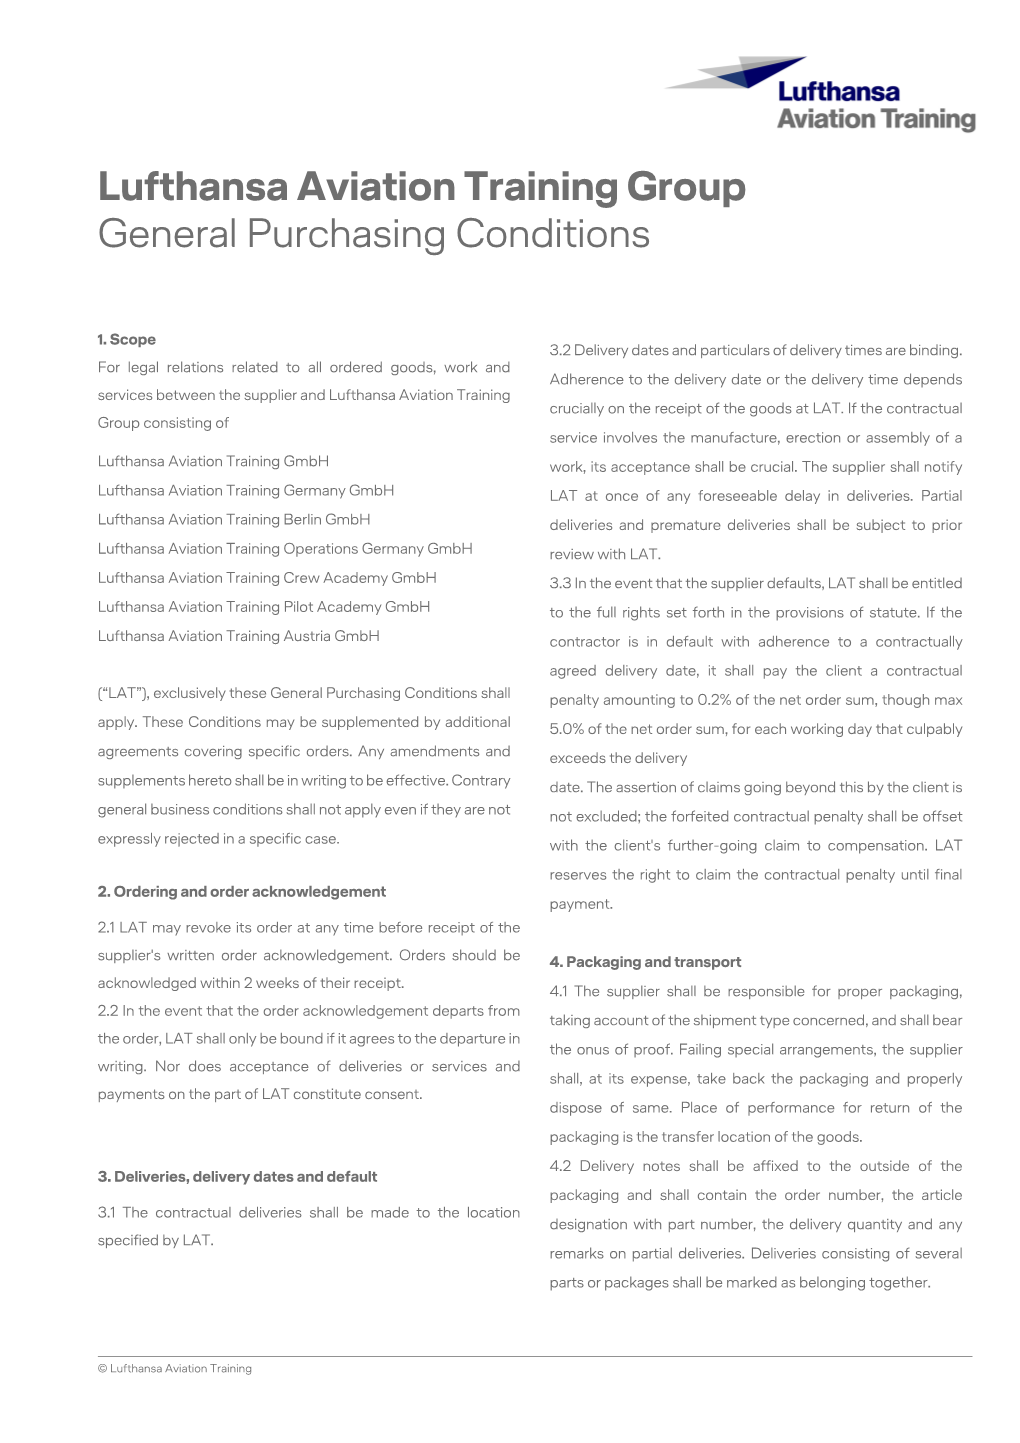 General Purchasing Conditions